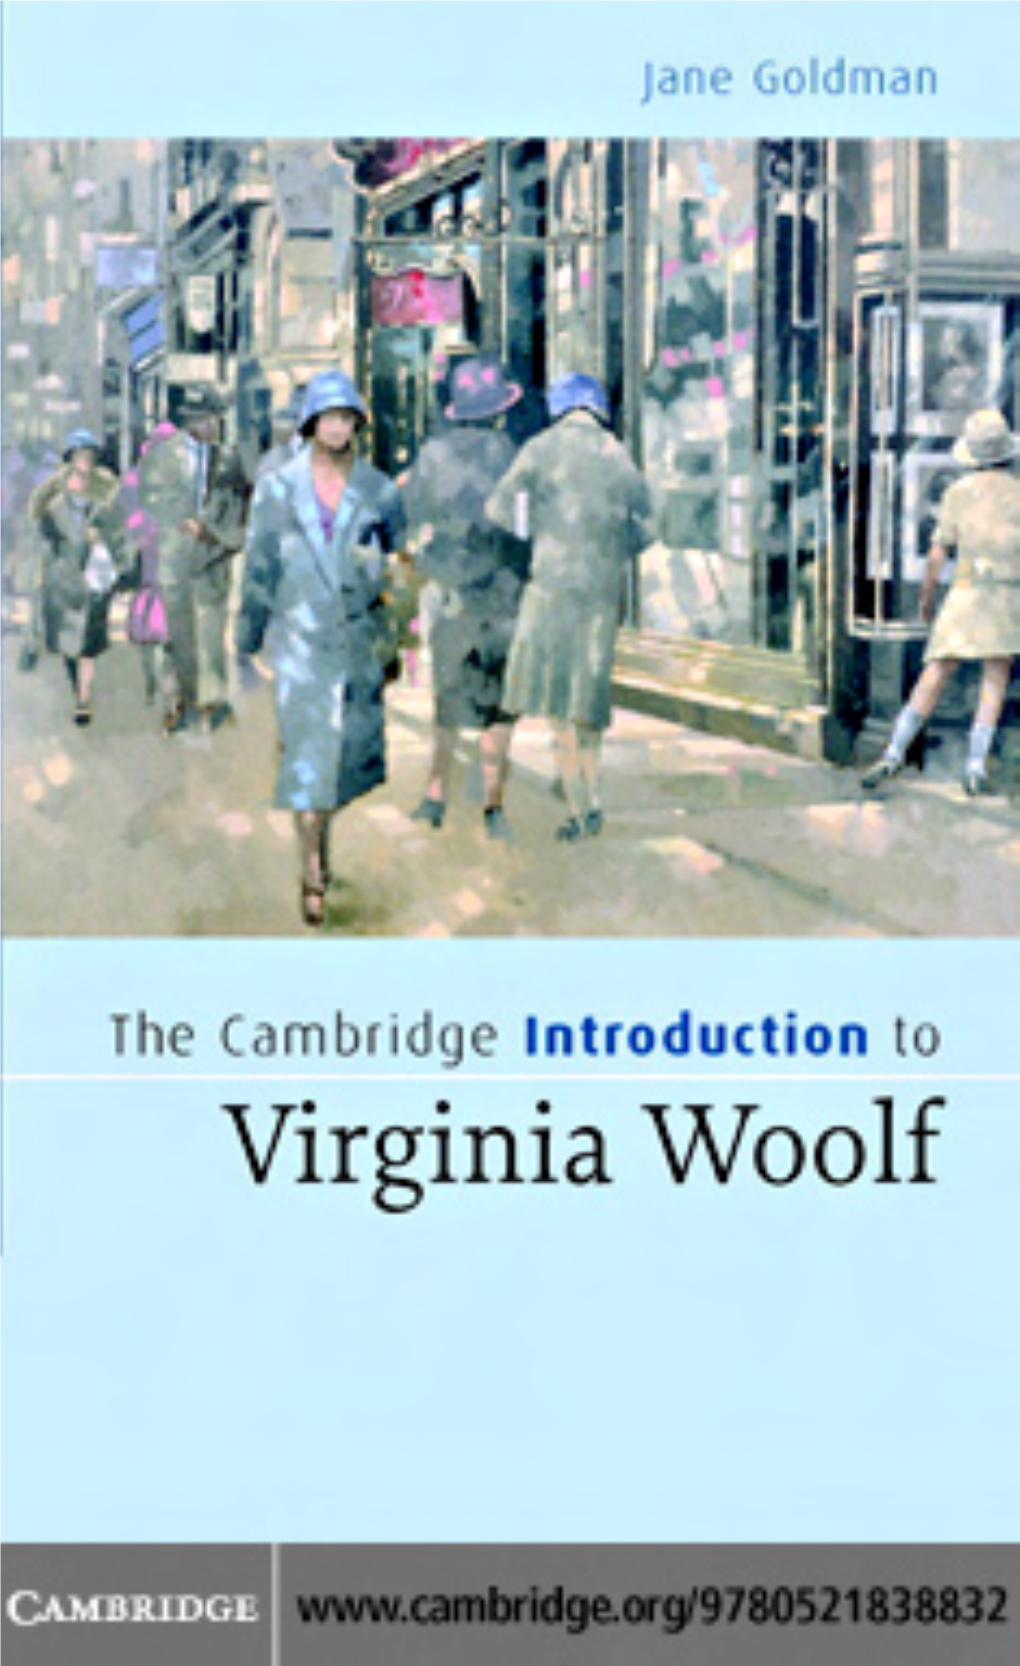 The Cambridge Introduction to Virginia Woolf for Students of Modern Literature, the Works of Virginia Woolf Are Essential Reading